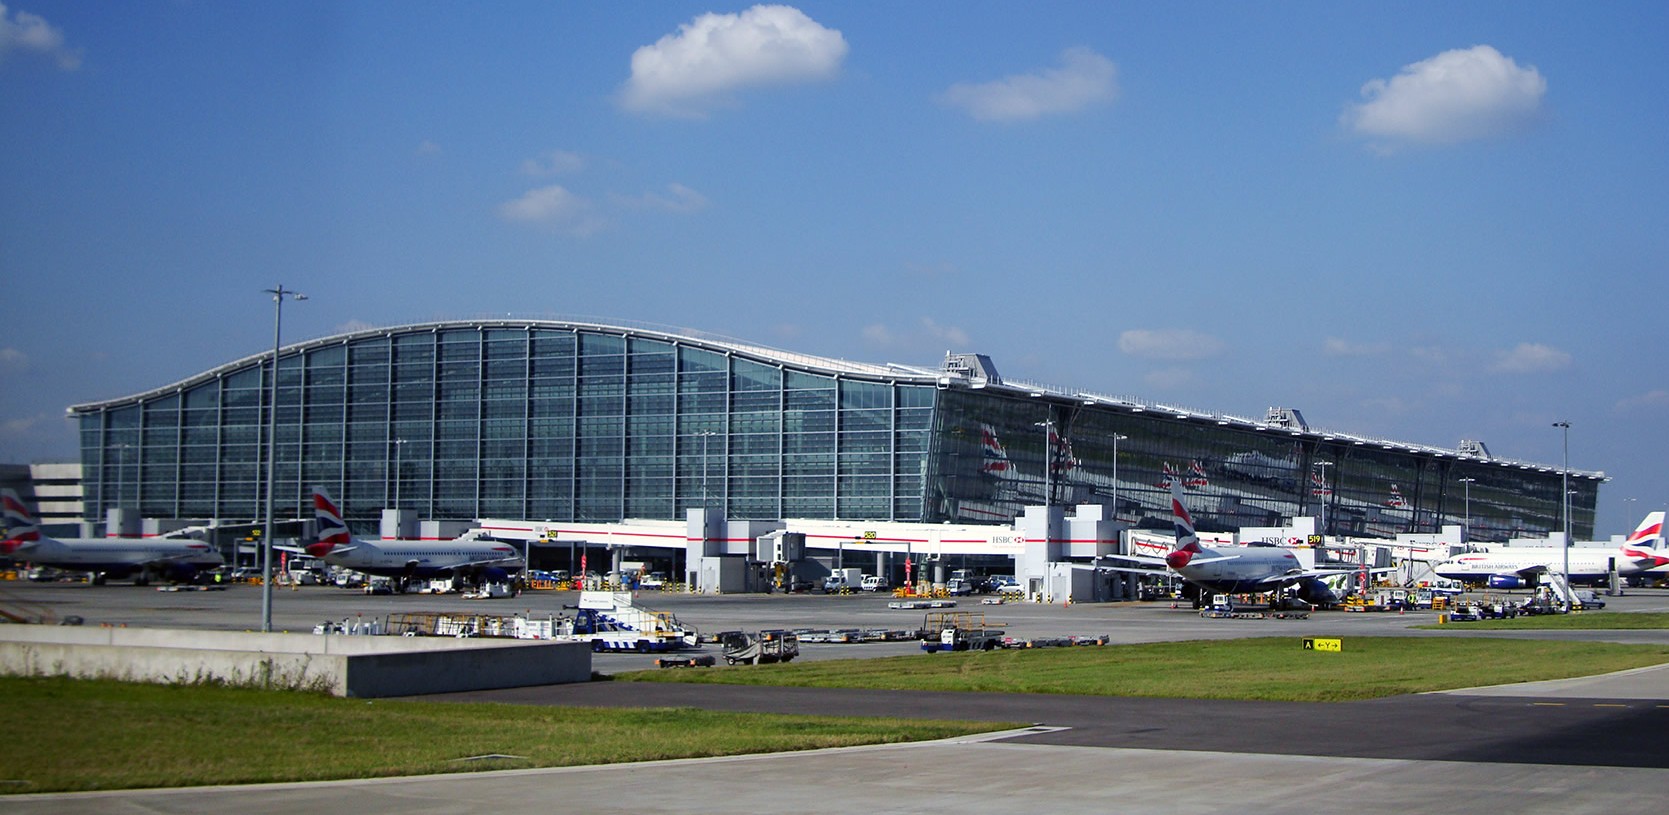 LHR: 10 Interesting Facts and Figures about London Heathrow Airport